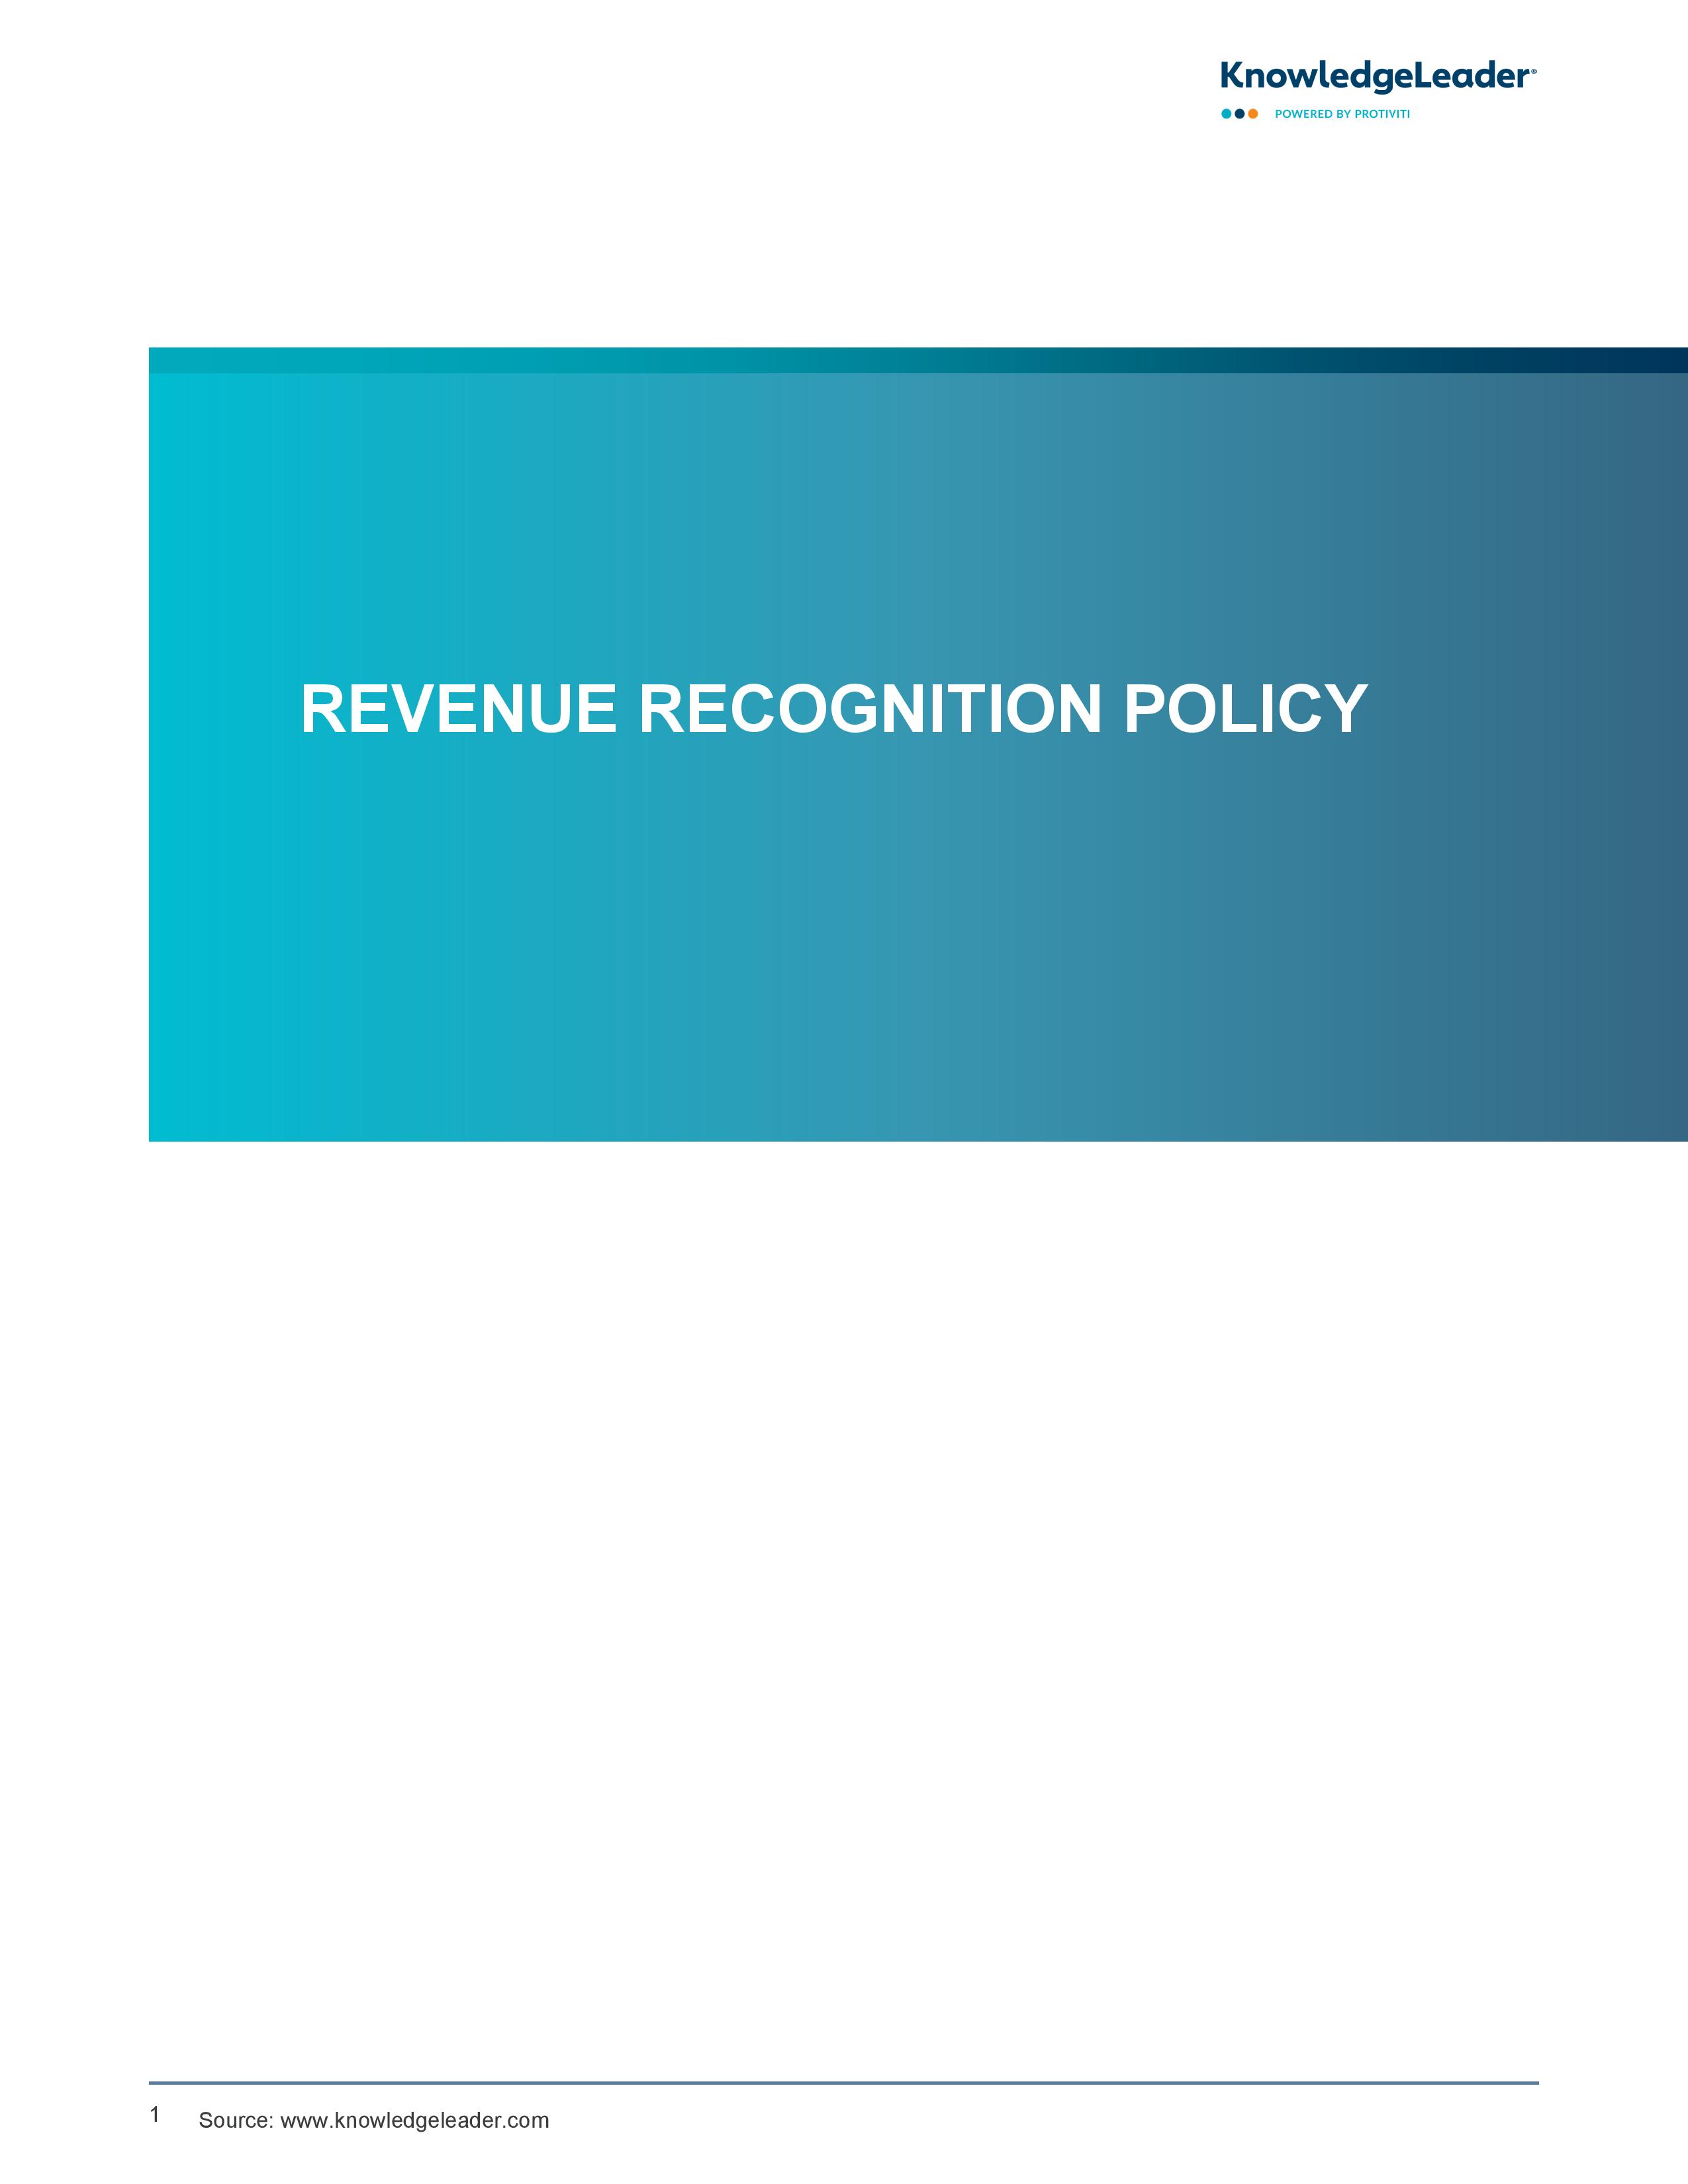 screenshot of the first page of Revenue Recognition Policy